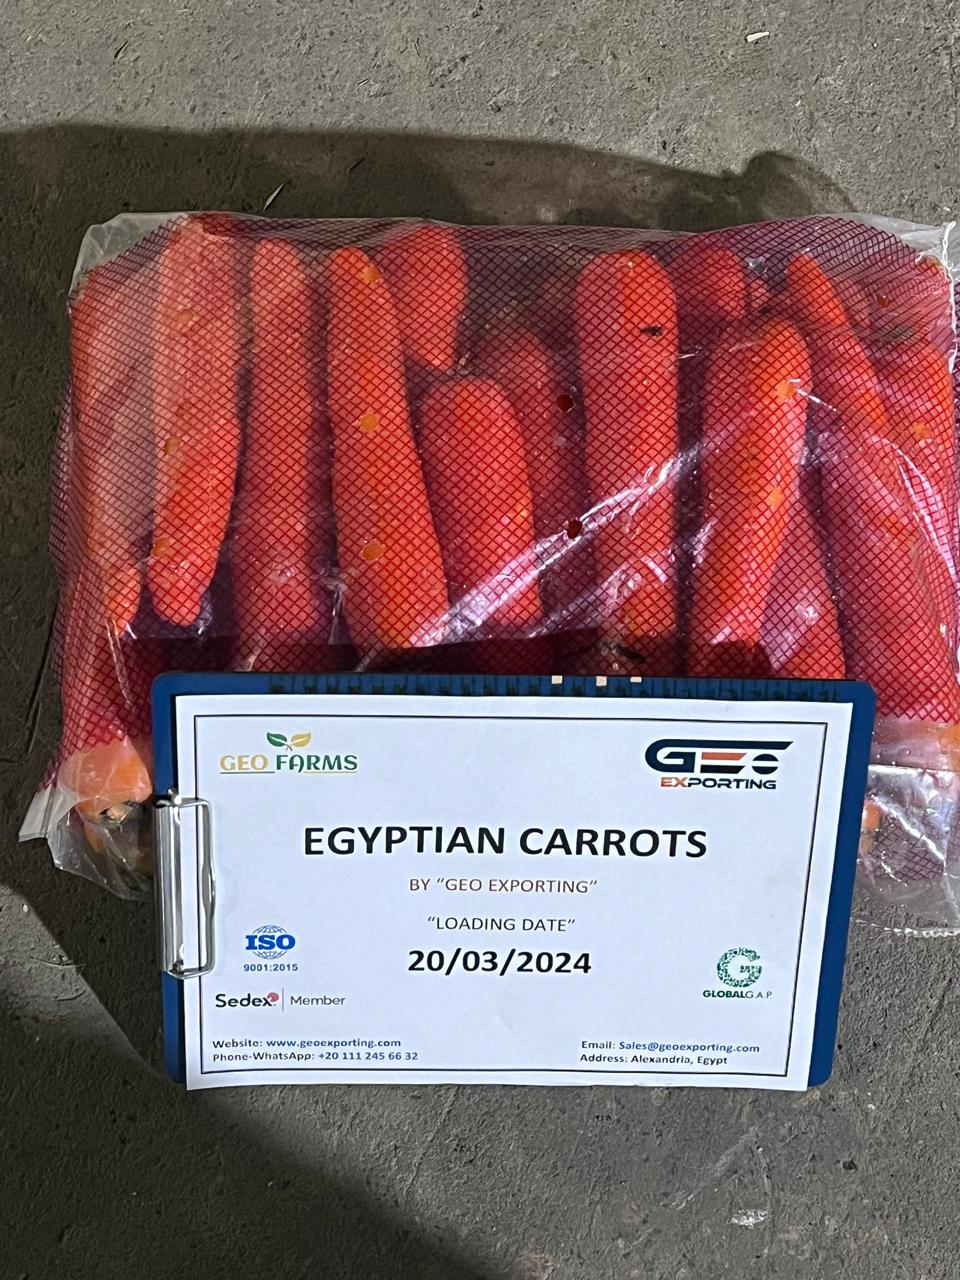 Hydro-Cooled & Polished Carrots to Ireland